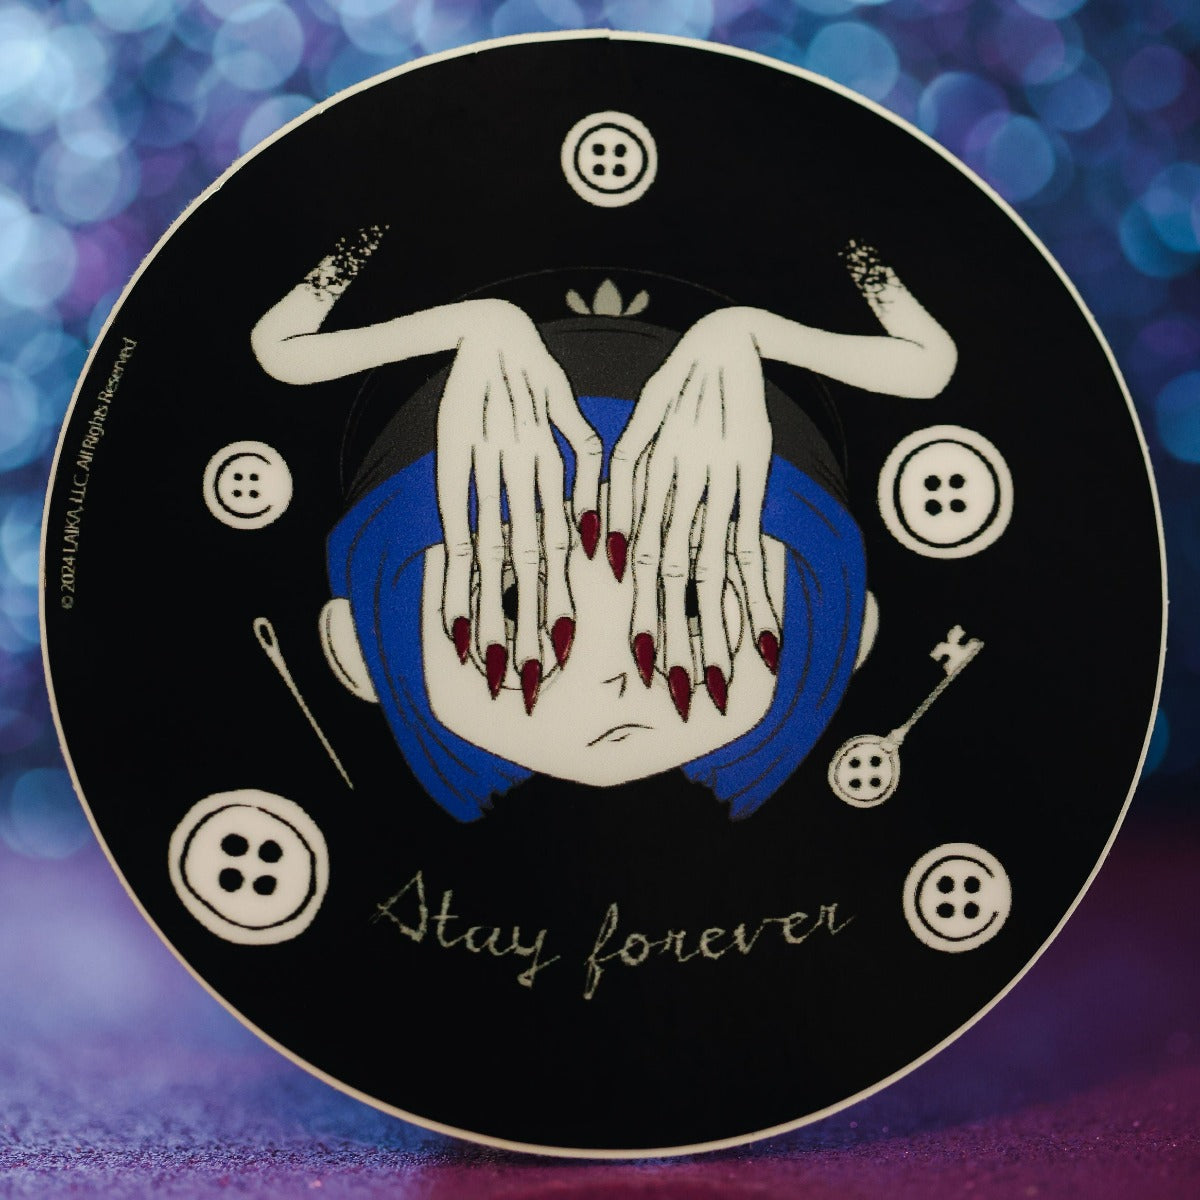 Coraline Stay Forever - Sticker